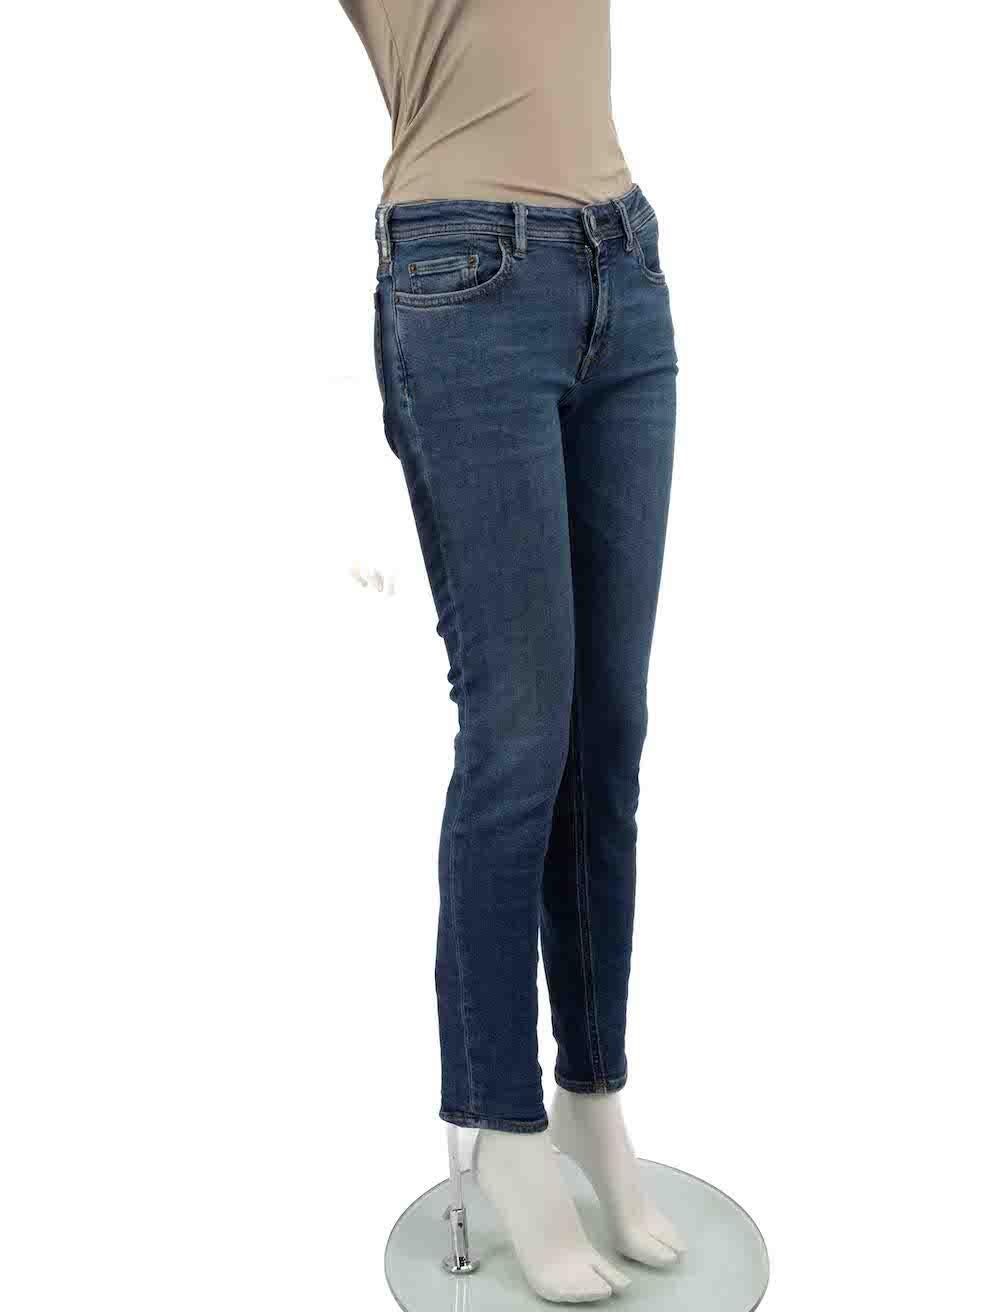 CONDITION is Very good. Hardly any visible wear to Jeans is evident on this used Acne Studios designer resale item. Please note that the belt loops are deliberately distressed.
 
Details
Climb model
Blue
Cotton
Skinny jeans
Low rise
Front zip